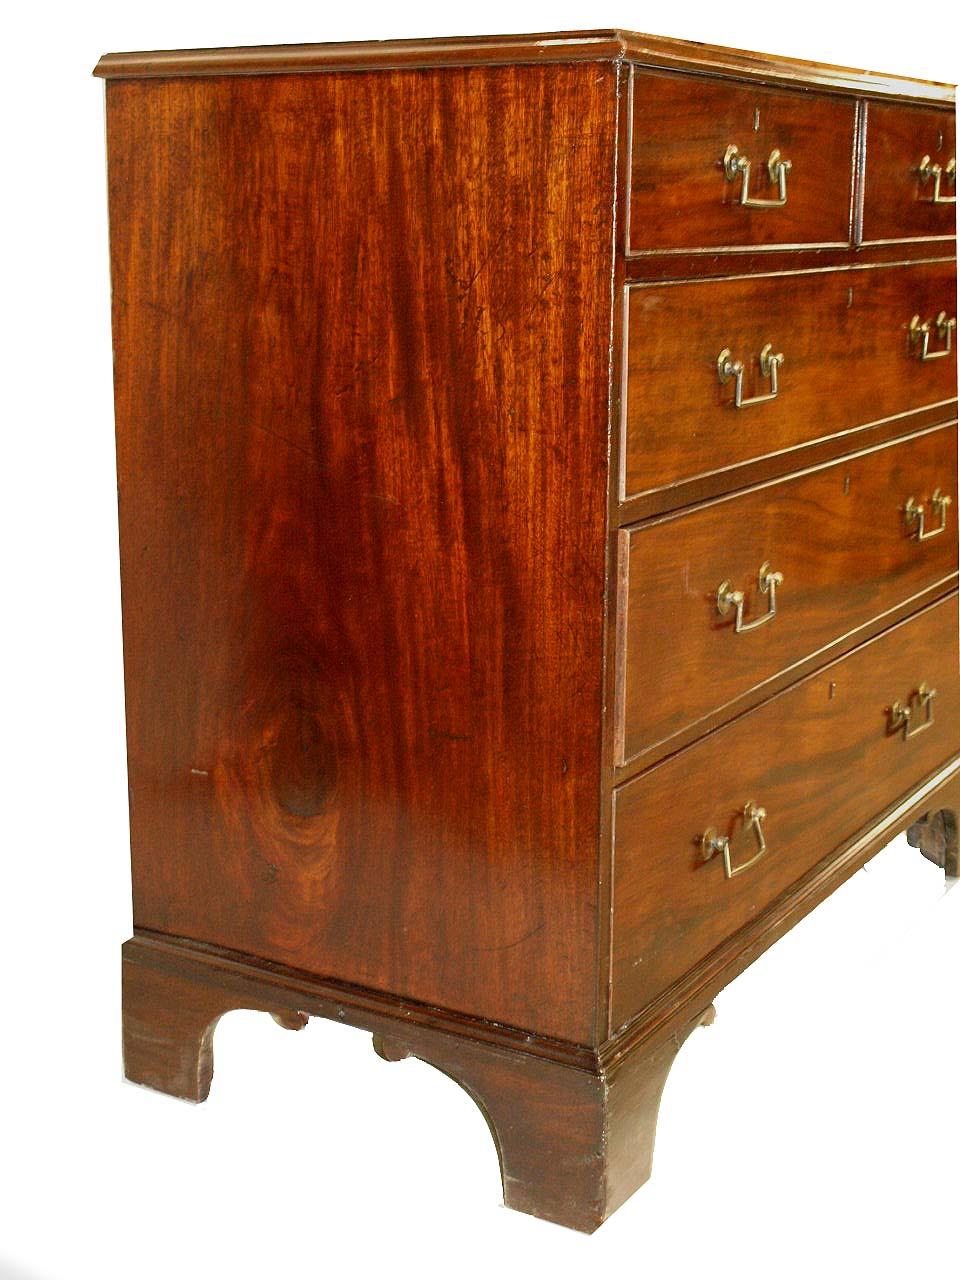 18th Century Chippendale mahoagany chest of drawers; this two over three drawer chest has an absolutely beautiful figured mahogany top , the original brass bail handles are unusual with being squared off ( not the usual swan neck design) . This